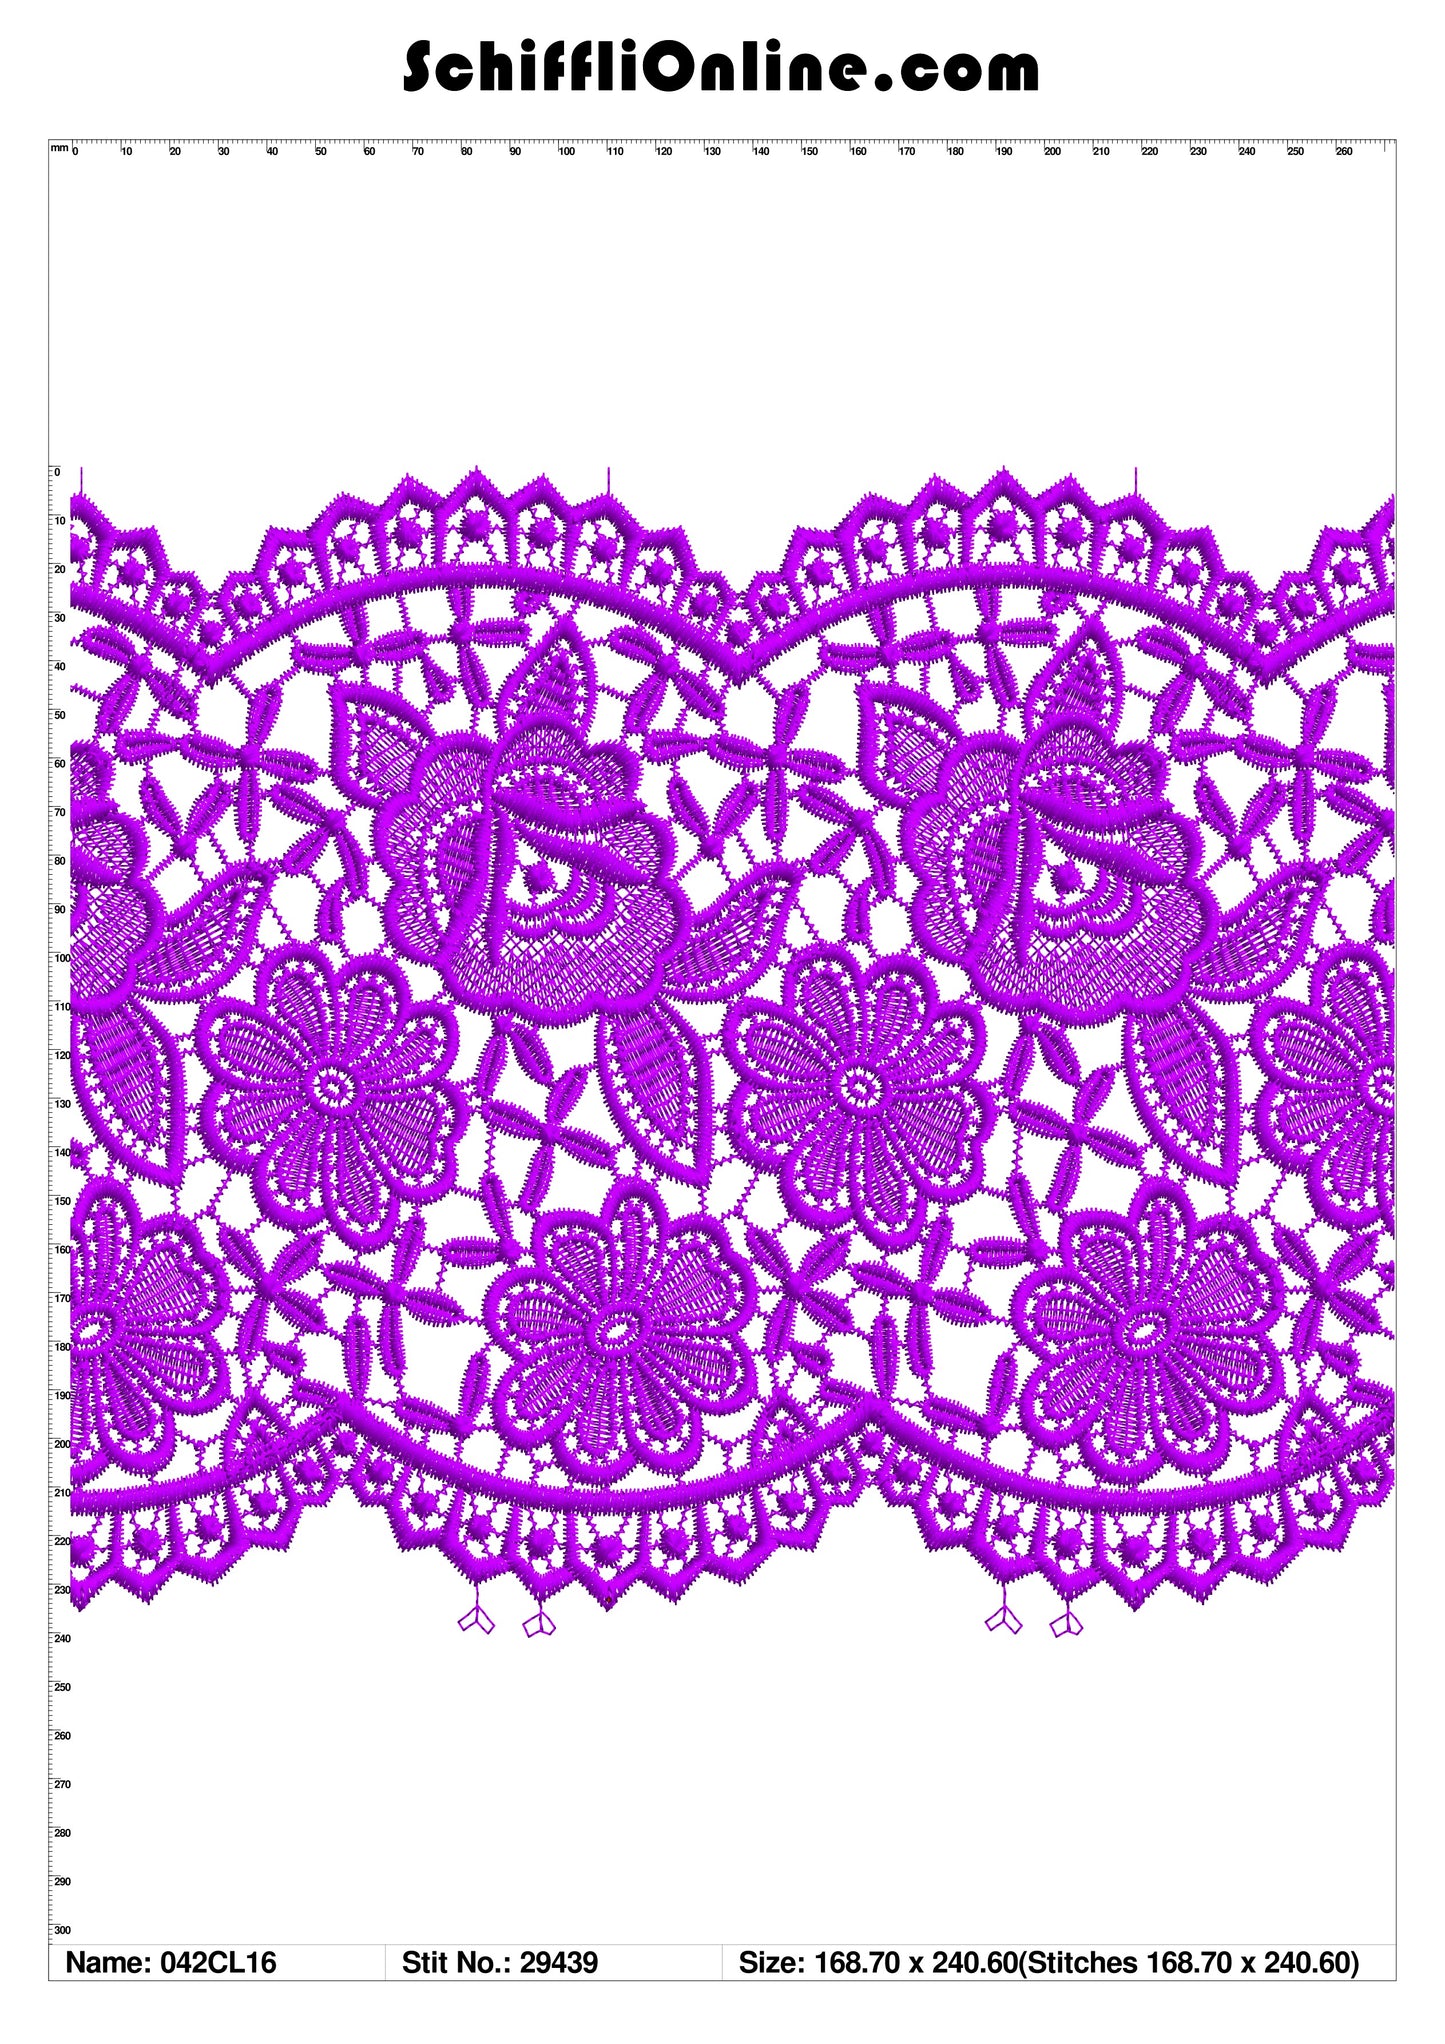 Book 293 CHEMICAL LACE 16X4 50 DESIGNS